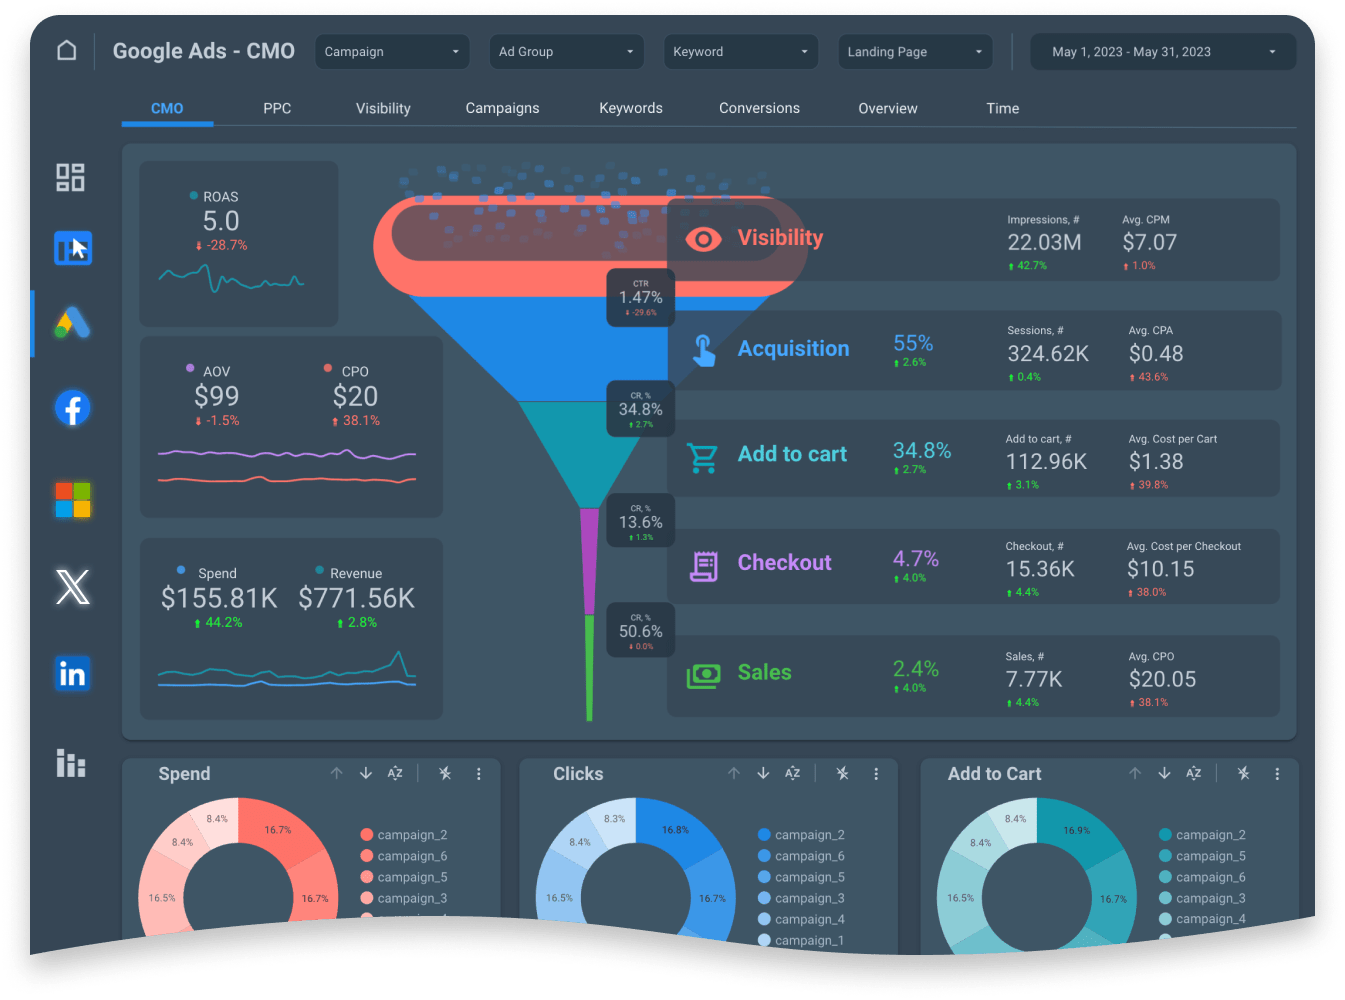 Metrics included in this CMO Dashboard